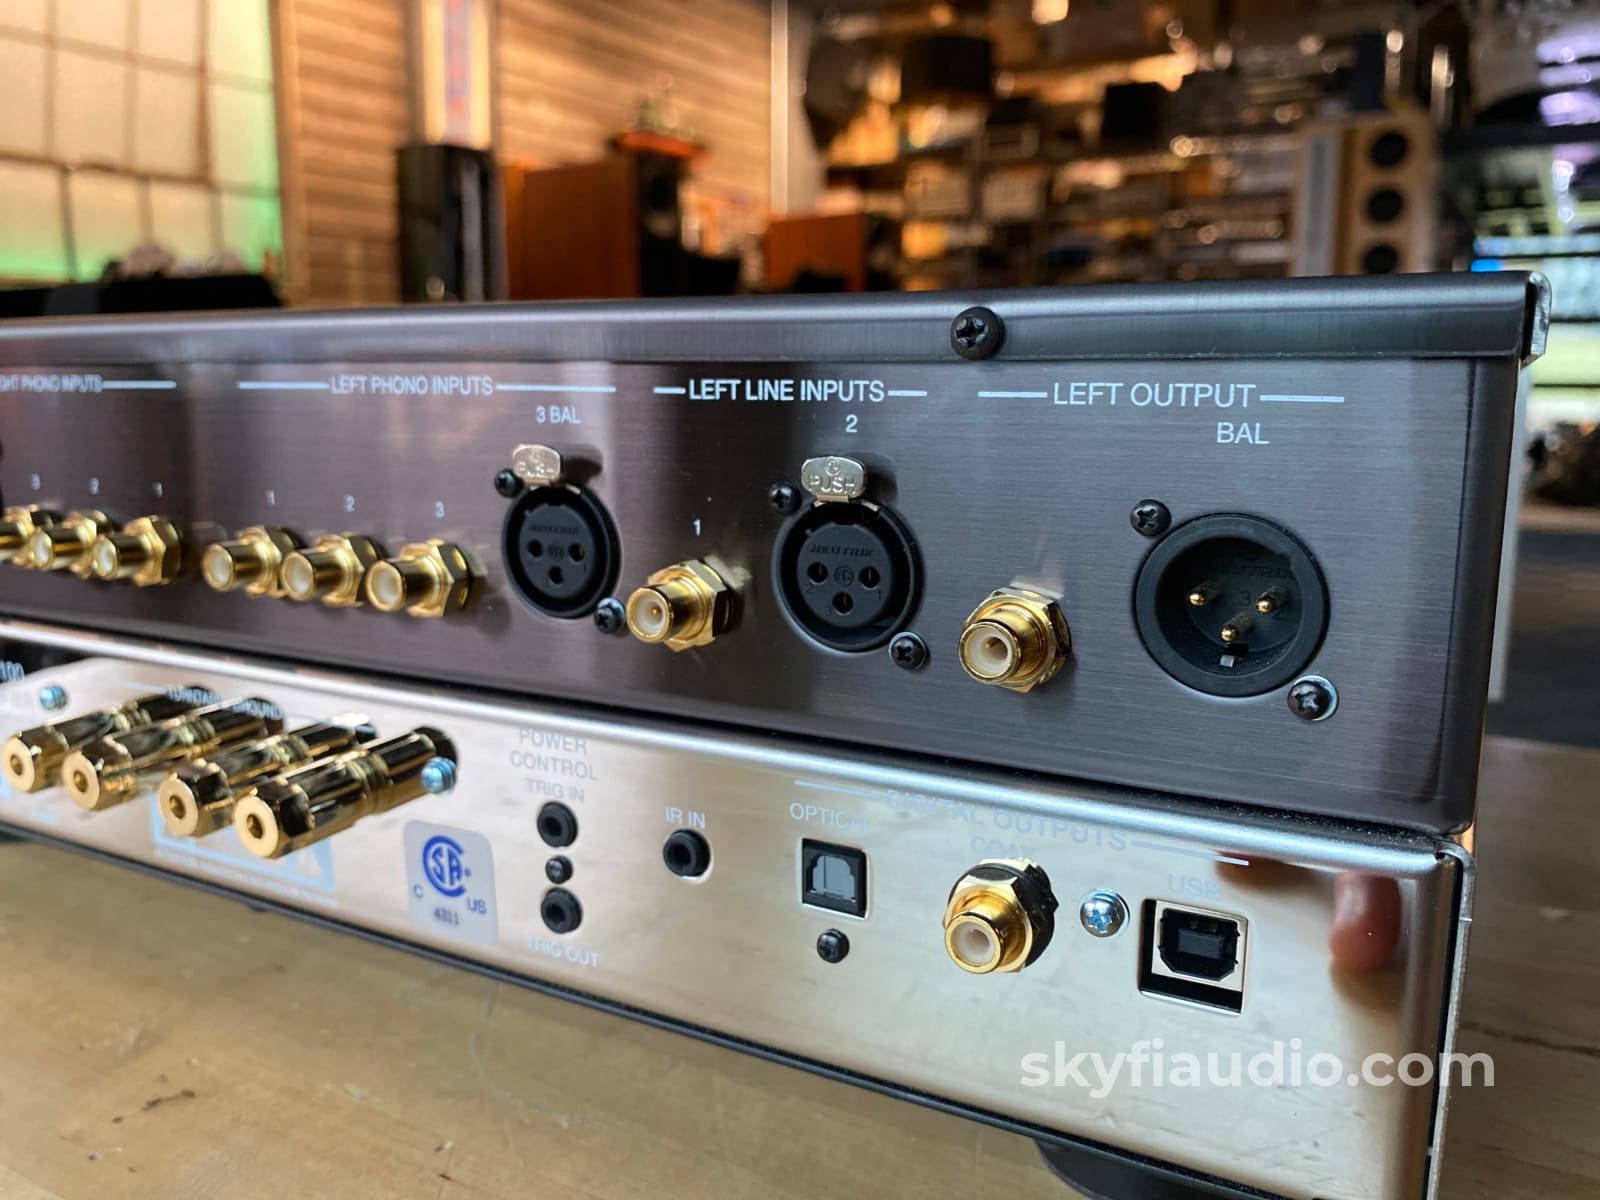 Mcintosh Mp1100 Flagship Tube Phono Preamp Complete And Like New - In Store Only Preamplifier